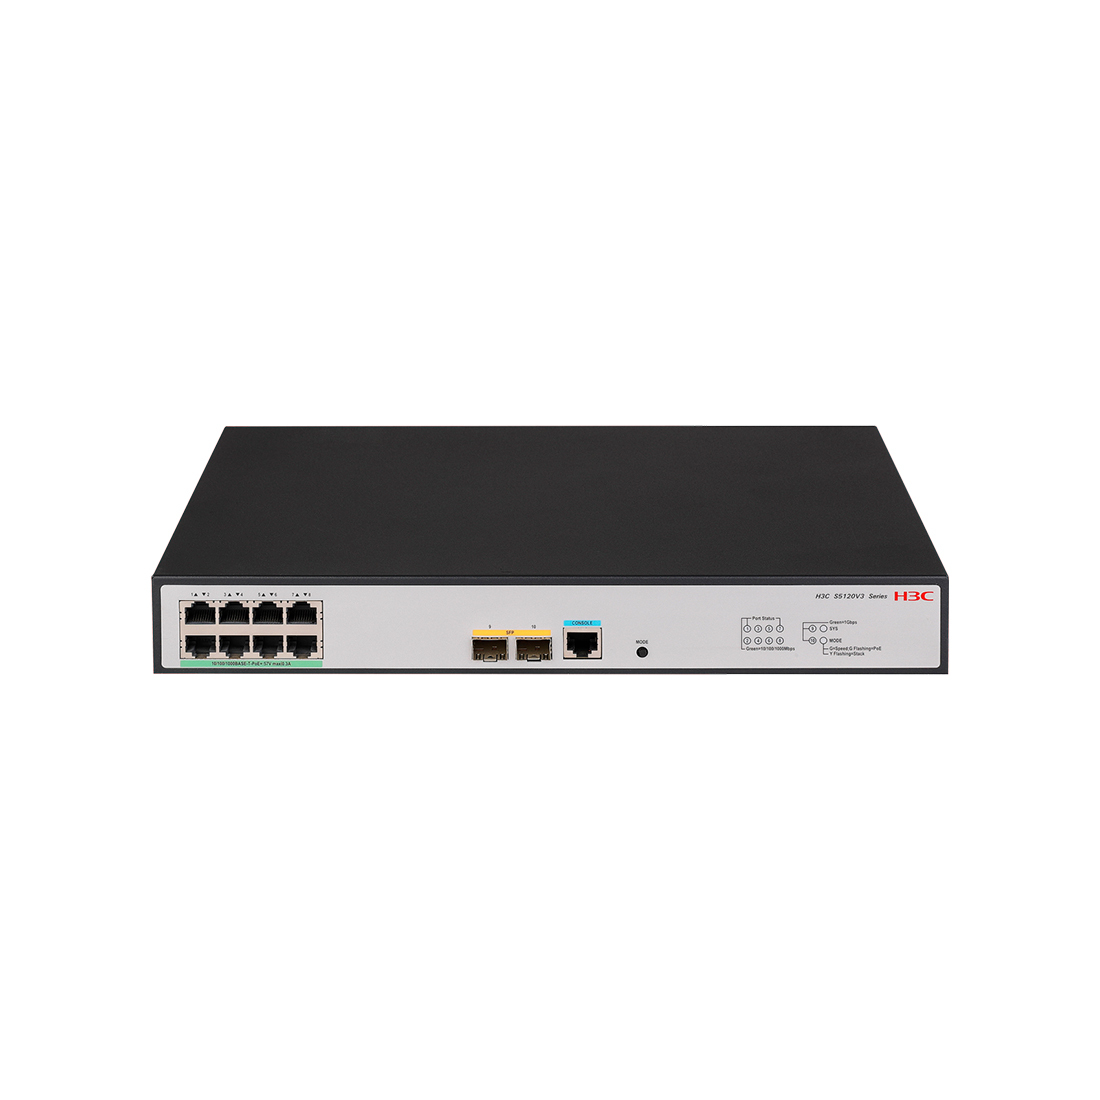 H3C S5120V3-10P-LI (9801A41E), 8 Port Giga with 2 x 1G SFP port Layer 3 Cloud Managed Switch